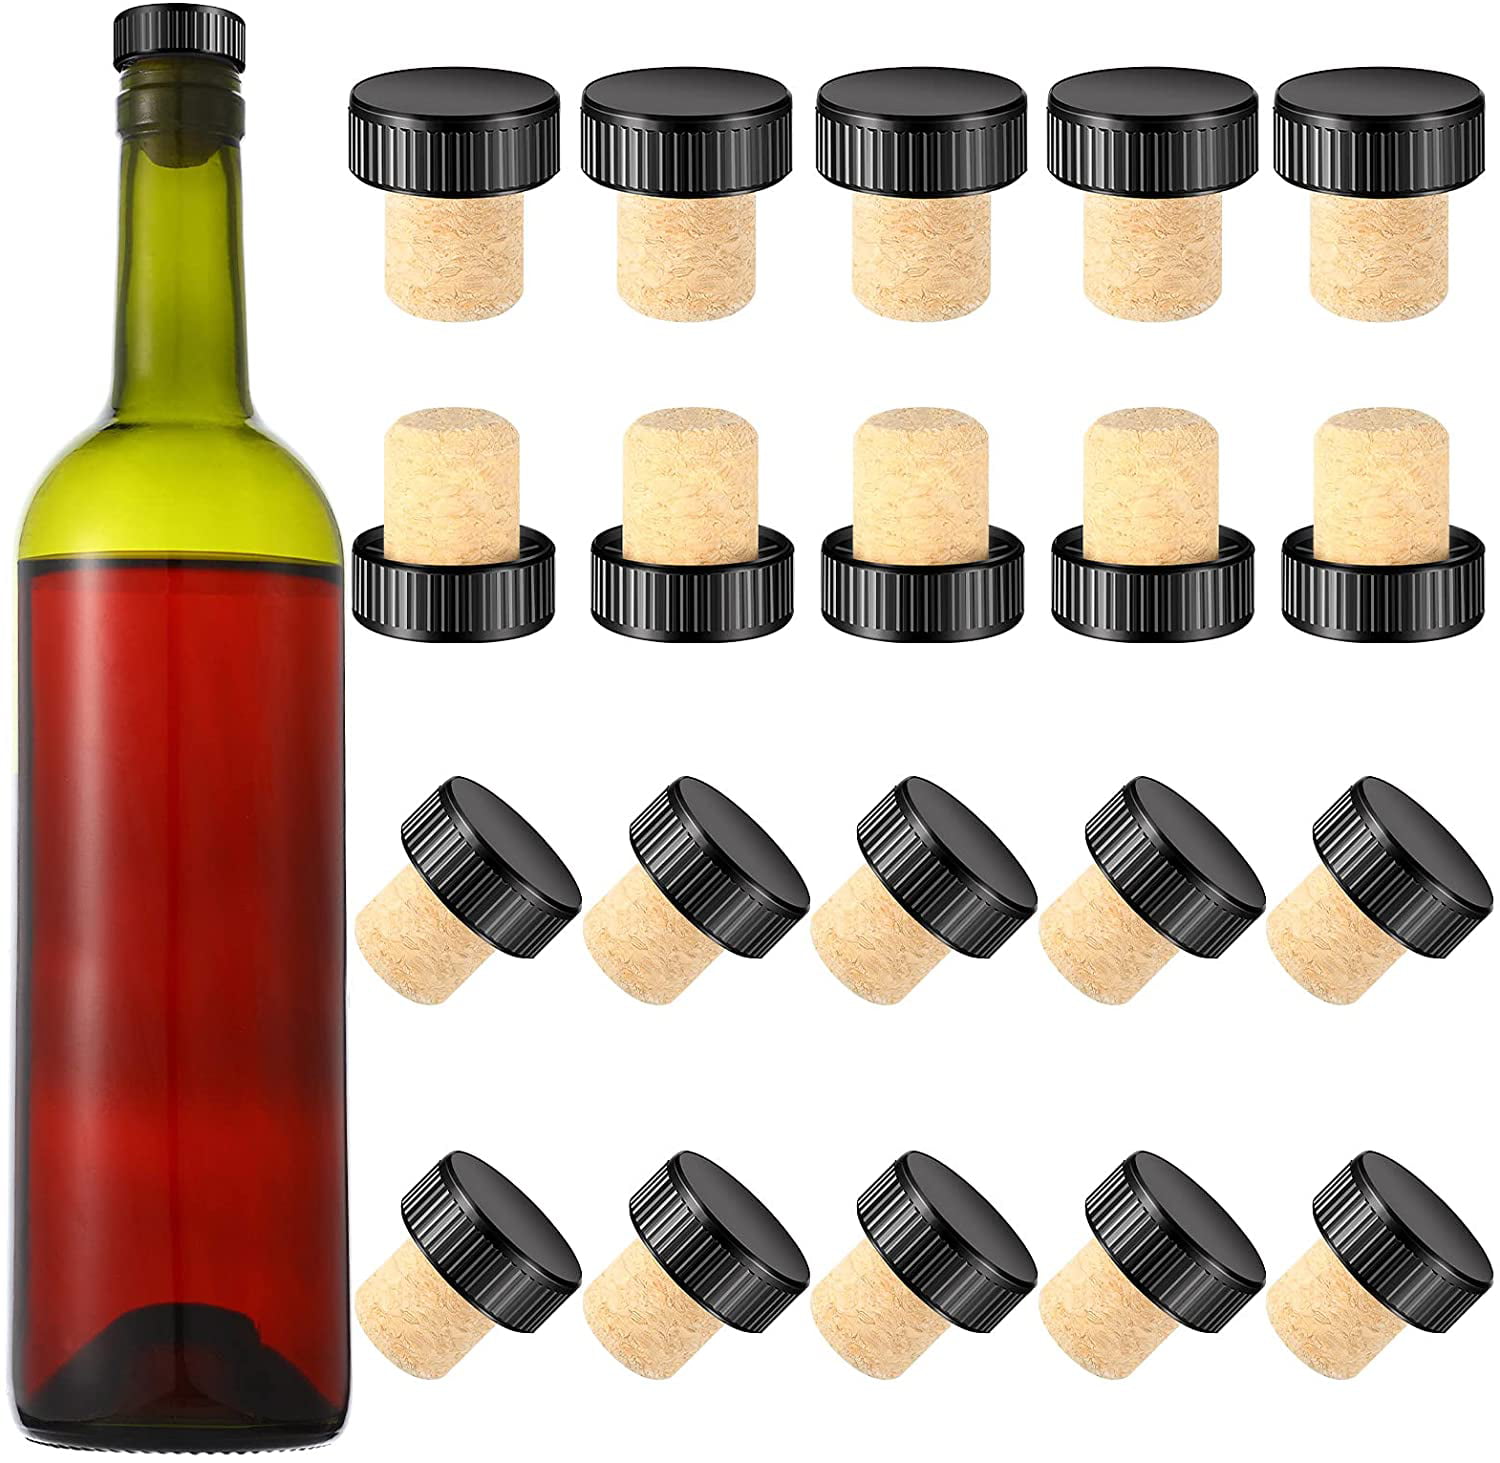 24 Pieces Cork Plugs Cork Stoppers Tasting Corks T-Shape Wine Corks with Black Plastic Top Wooden Wine Bottle Stopper Bottle Plugs Replacement Corks for Wine Beer Bottle Glass Bottles DIY Craft 